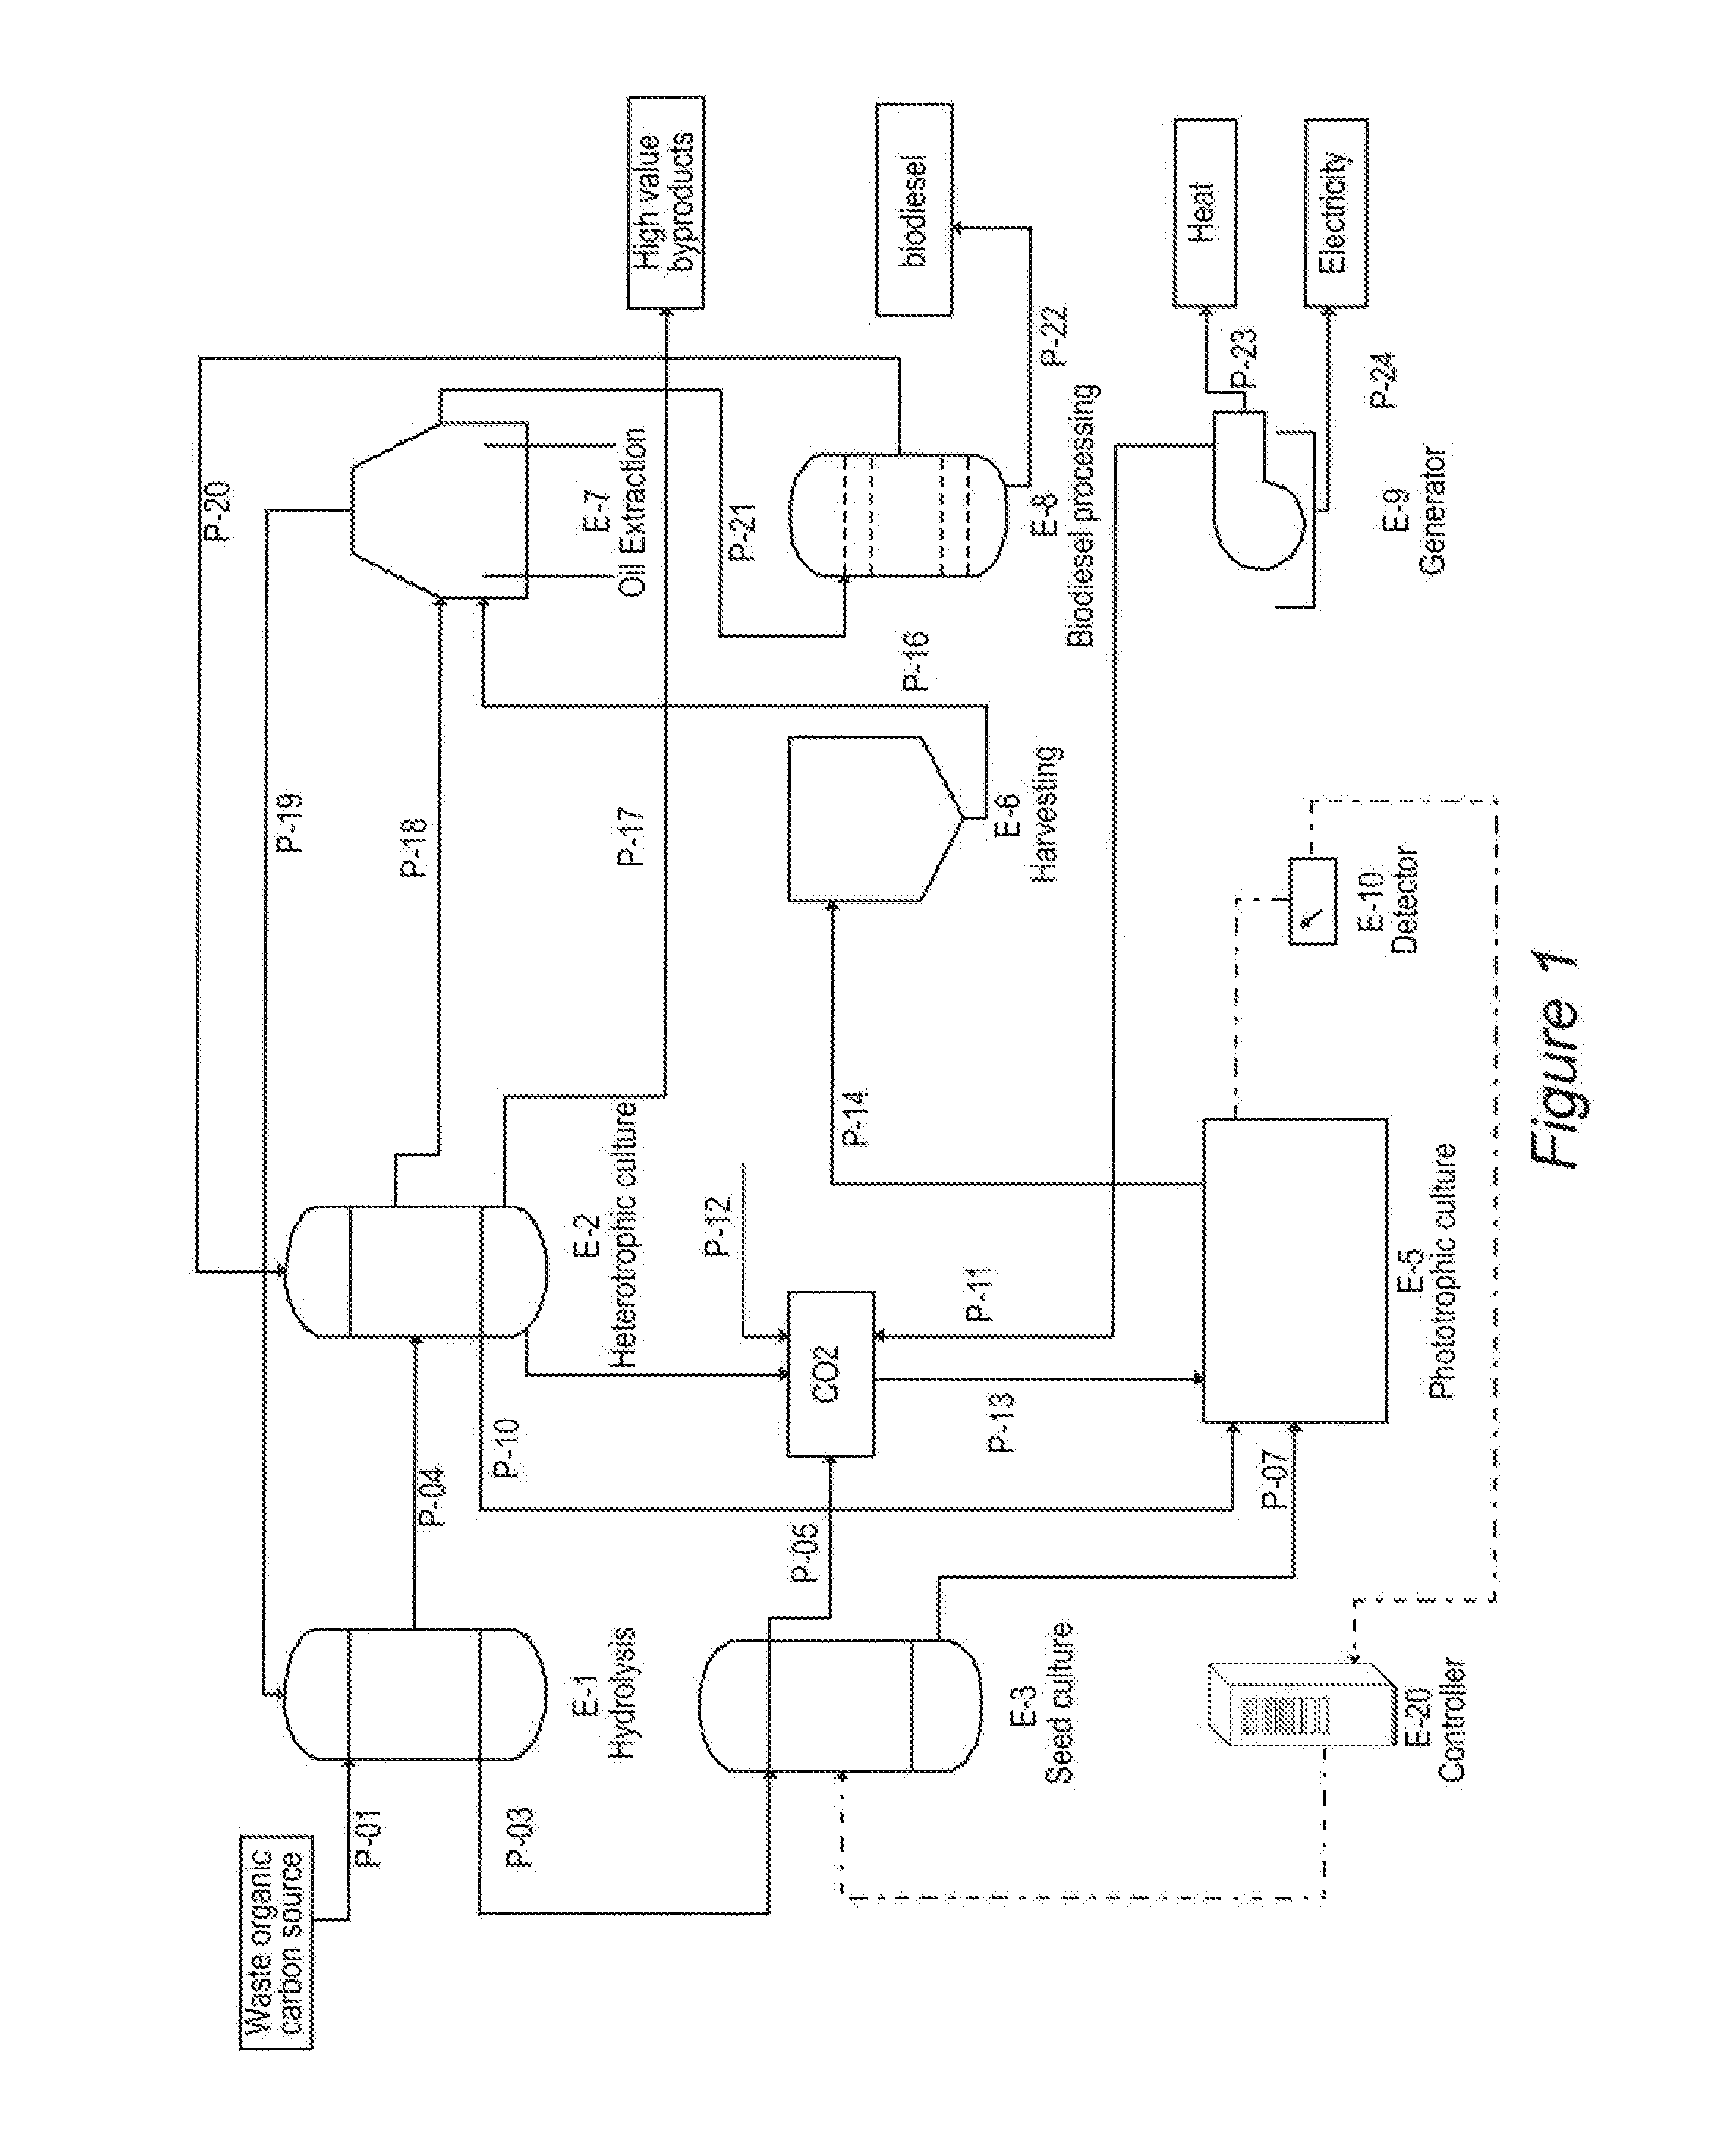 Integrated system for production of biofuel feedstock